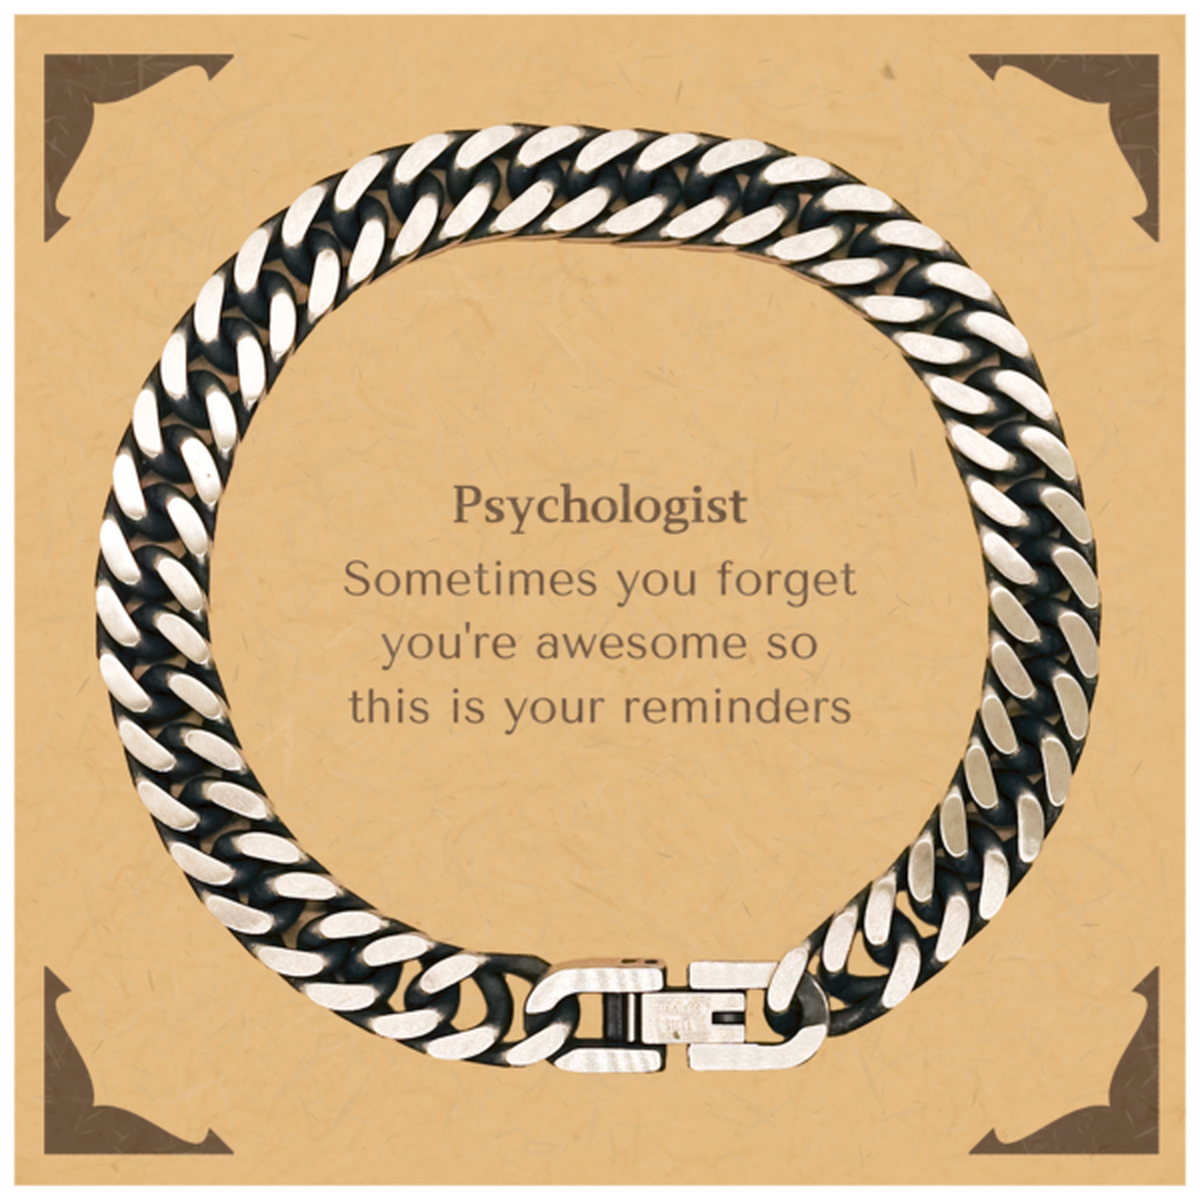 Sentimental Psychologist Cuban Link Chain Bracelet, Psychologist Sometimes you forget you're awesome so this is your reminders, Graduation Christmas Birthday Gifts for Psychologist, Men, Women, Coworkers